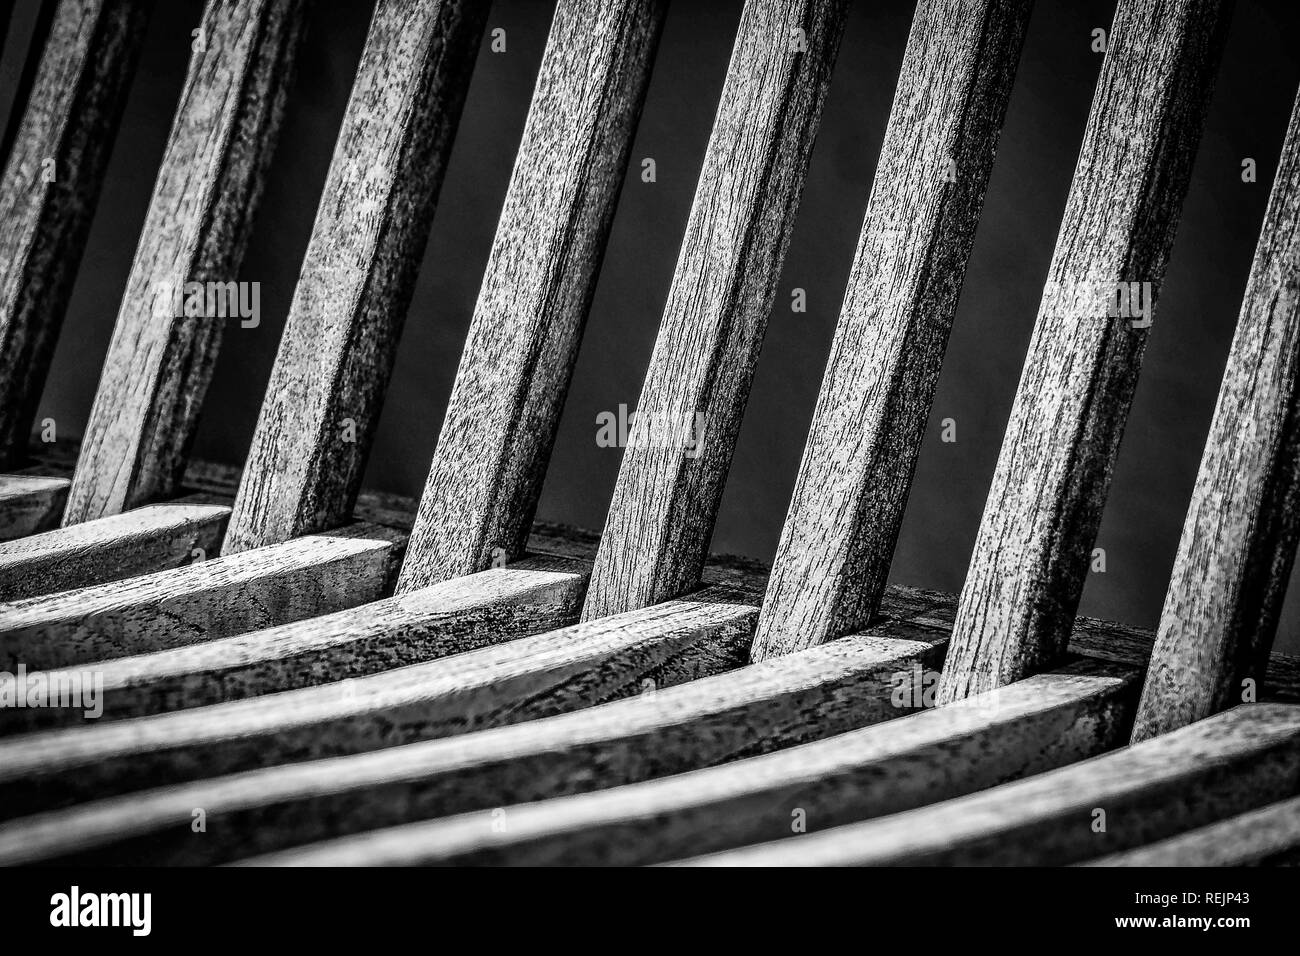 Wood pattern of a chair in black and white colors Stock Photo